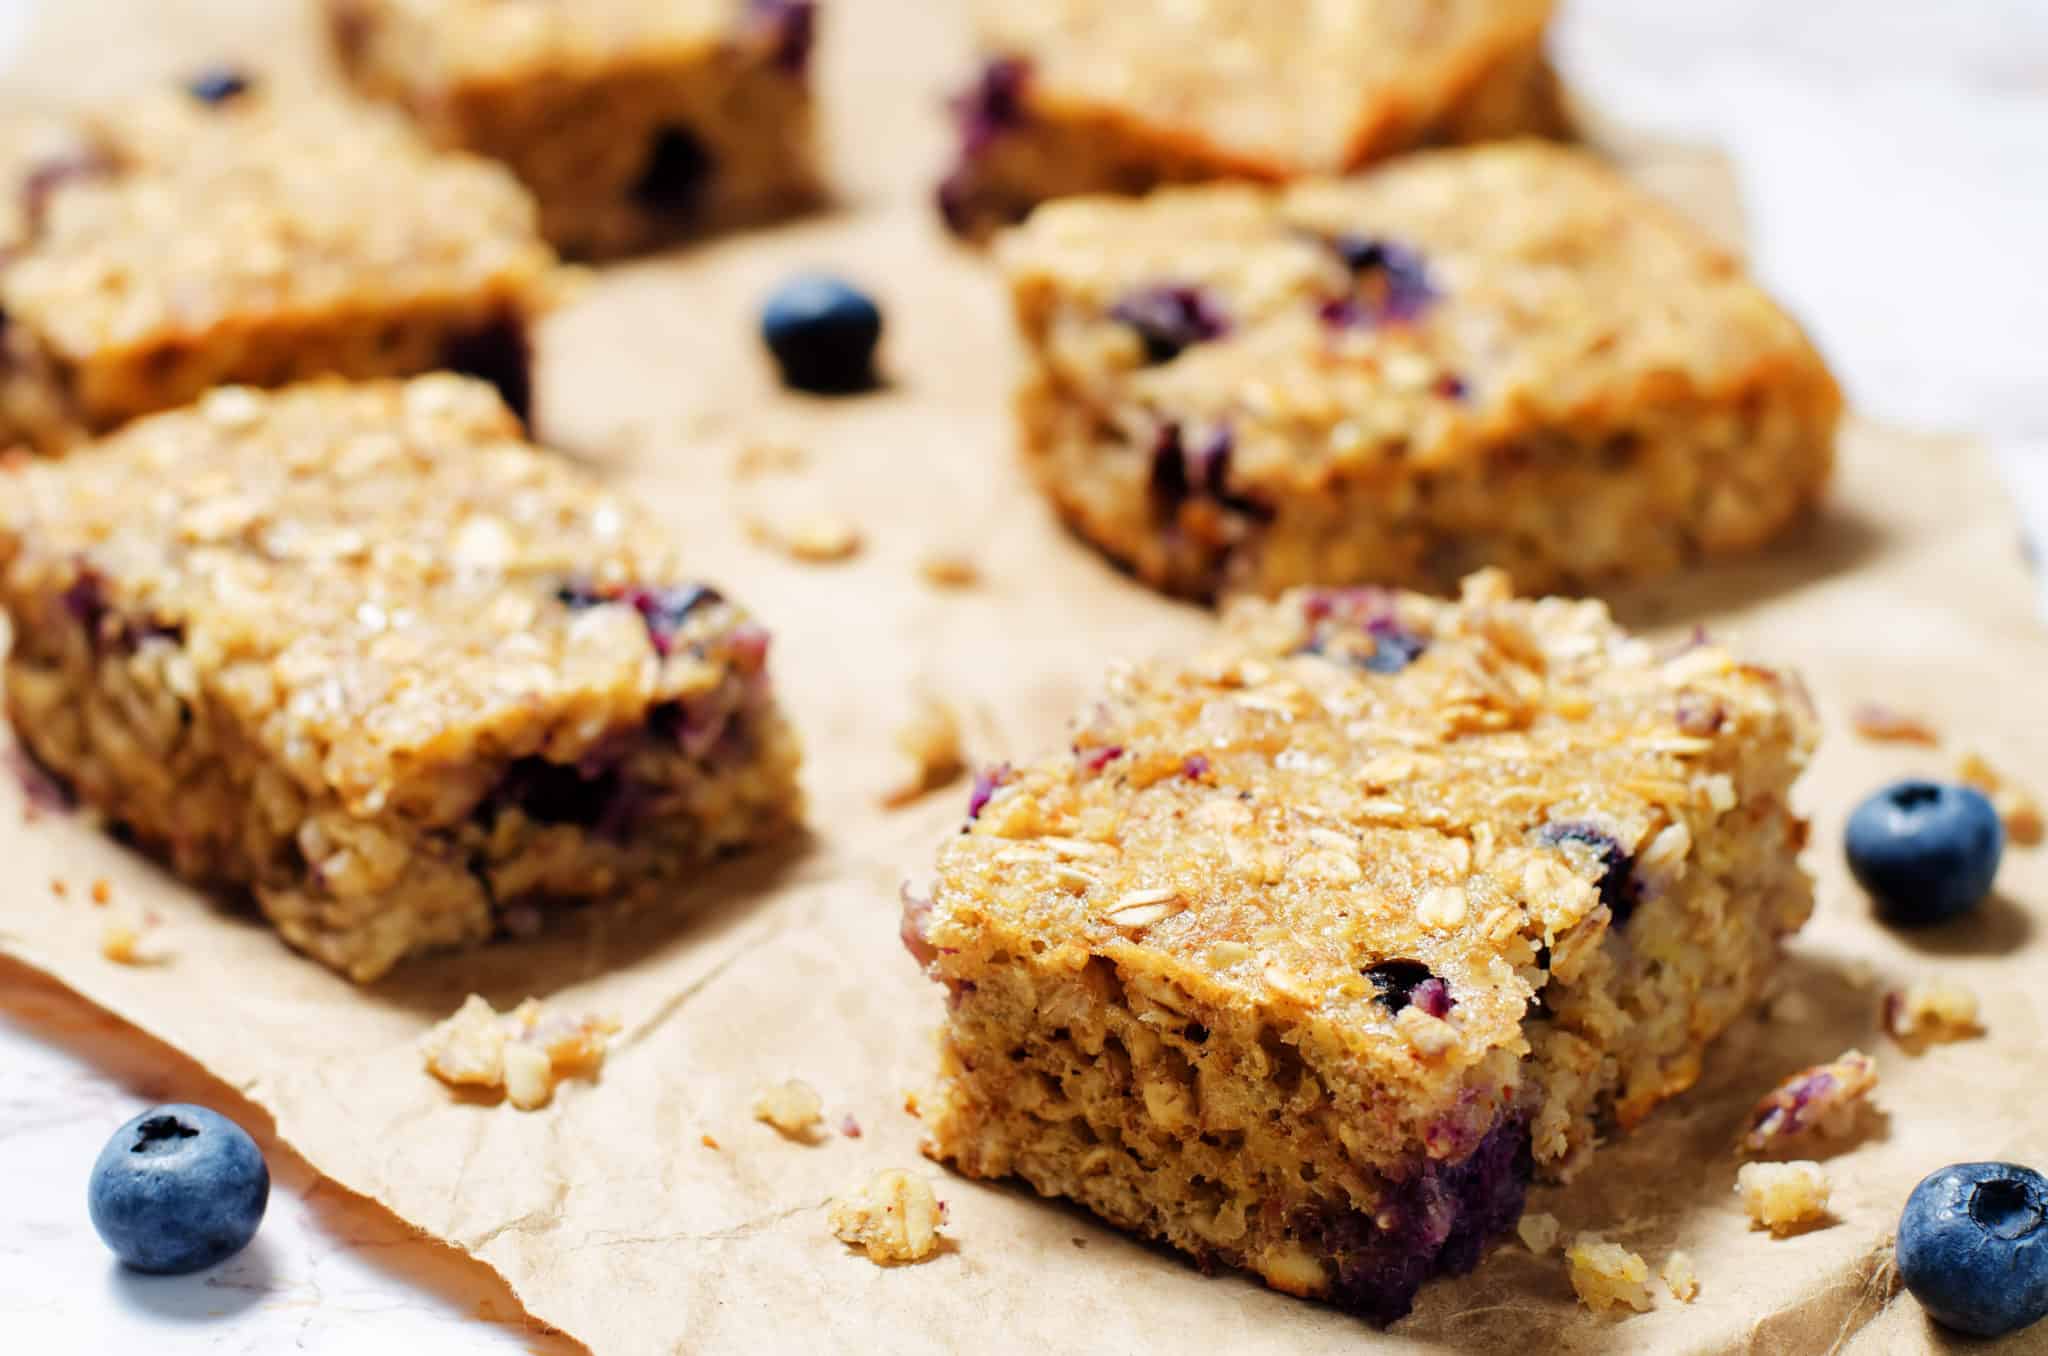 Blueberry Quinoa Oats Breakfast Bars on brown paper.